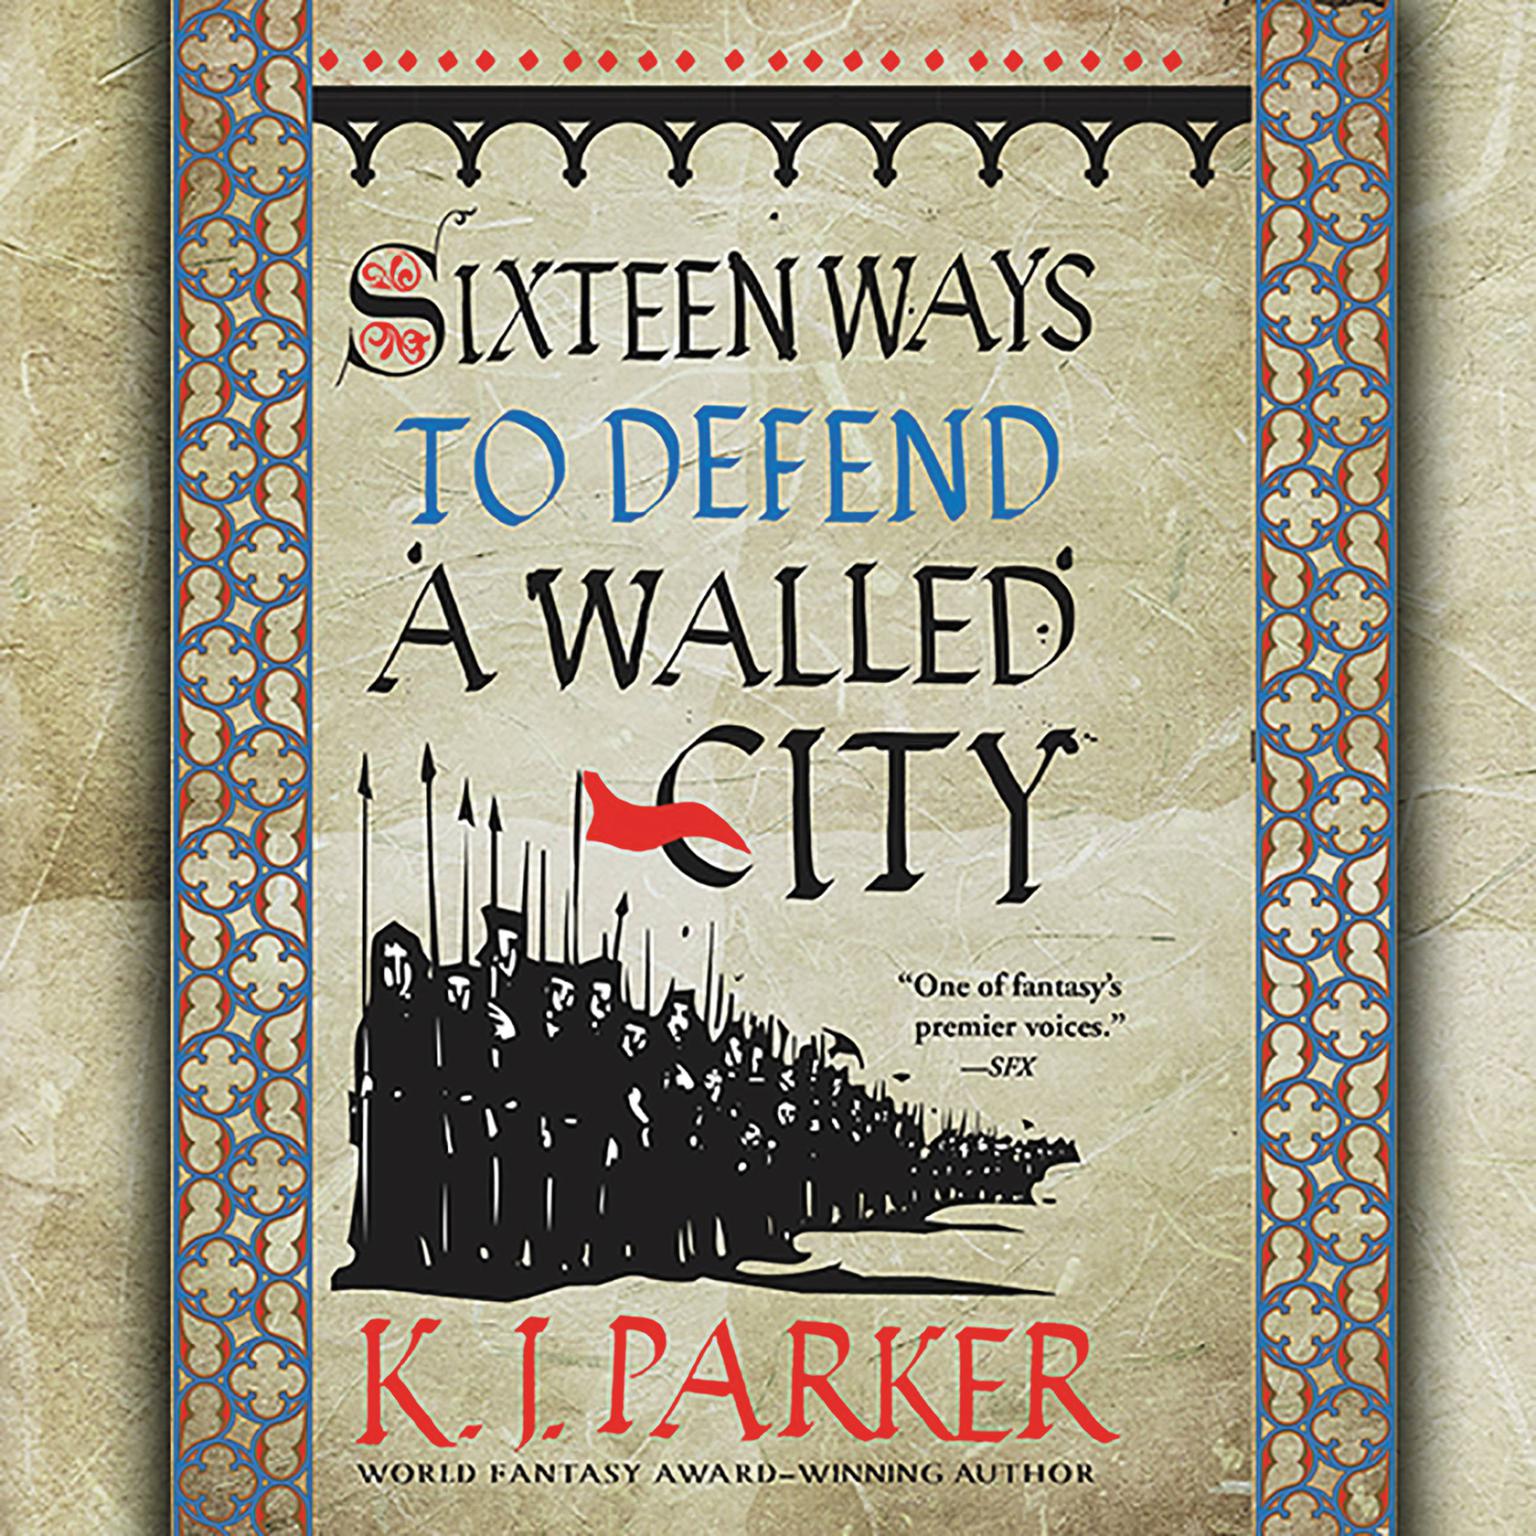 Sixteen Ways to Defend a Walled City Audiobook, by K. J. Parker